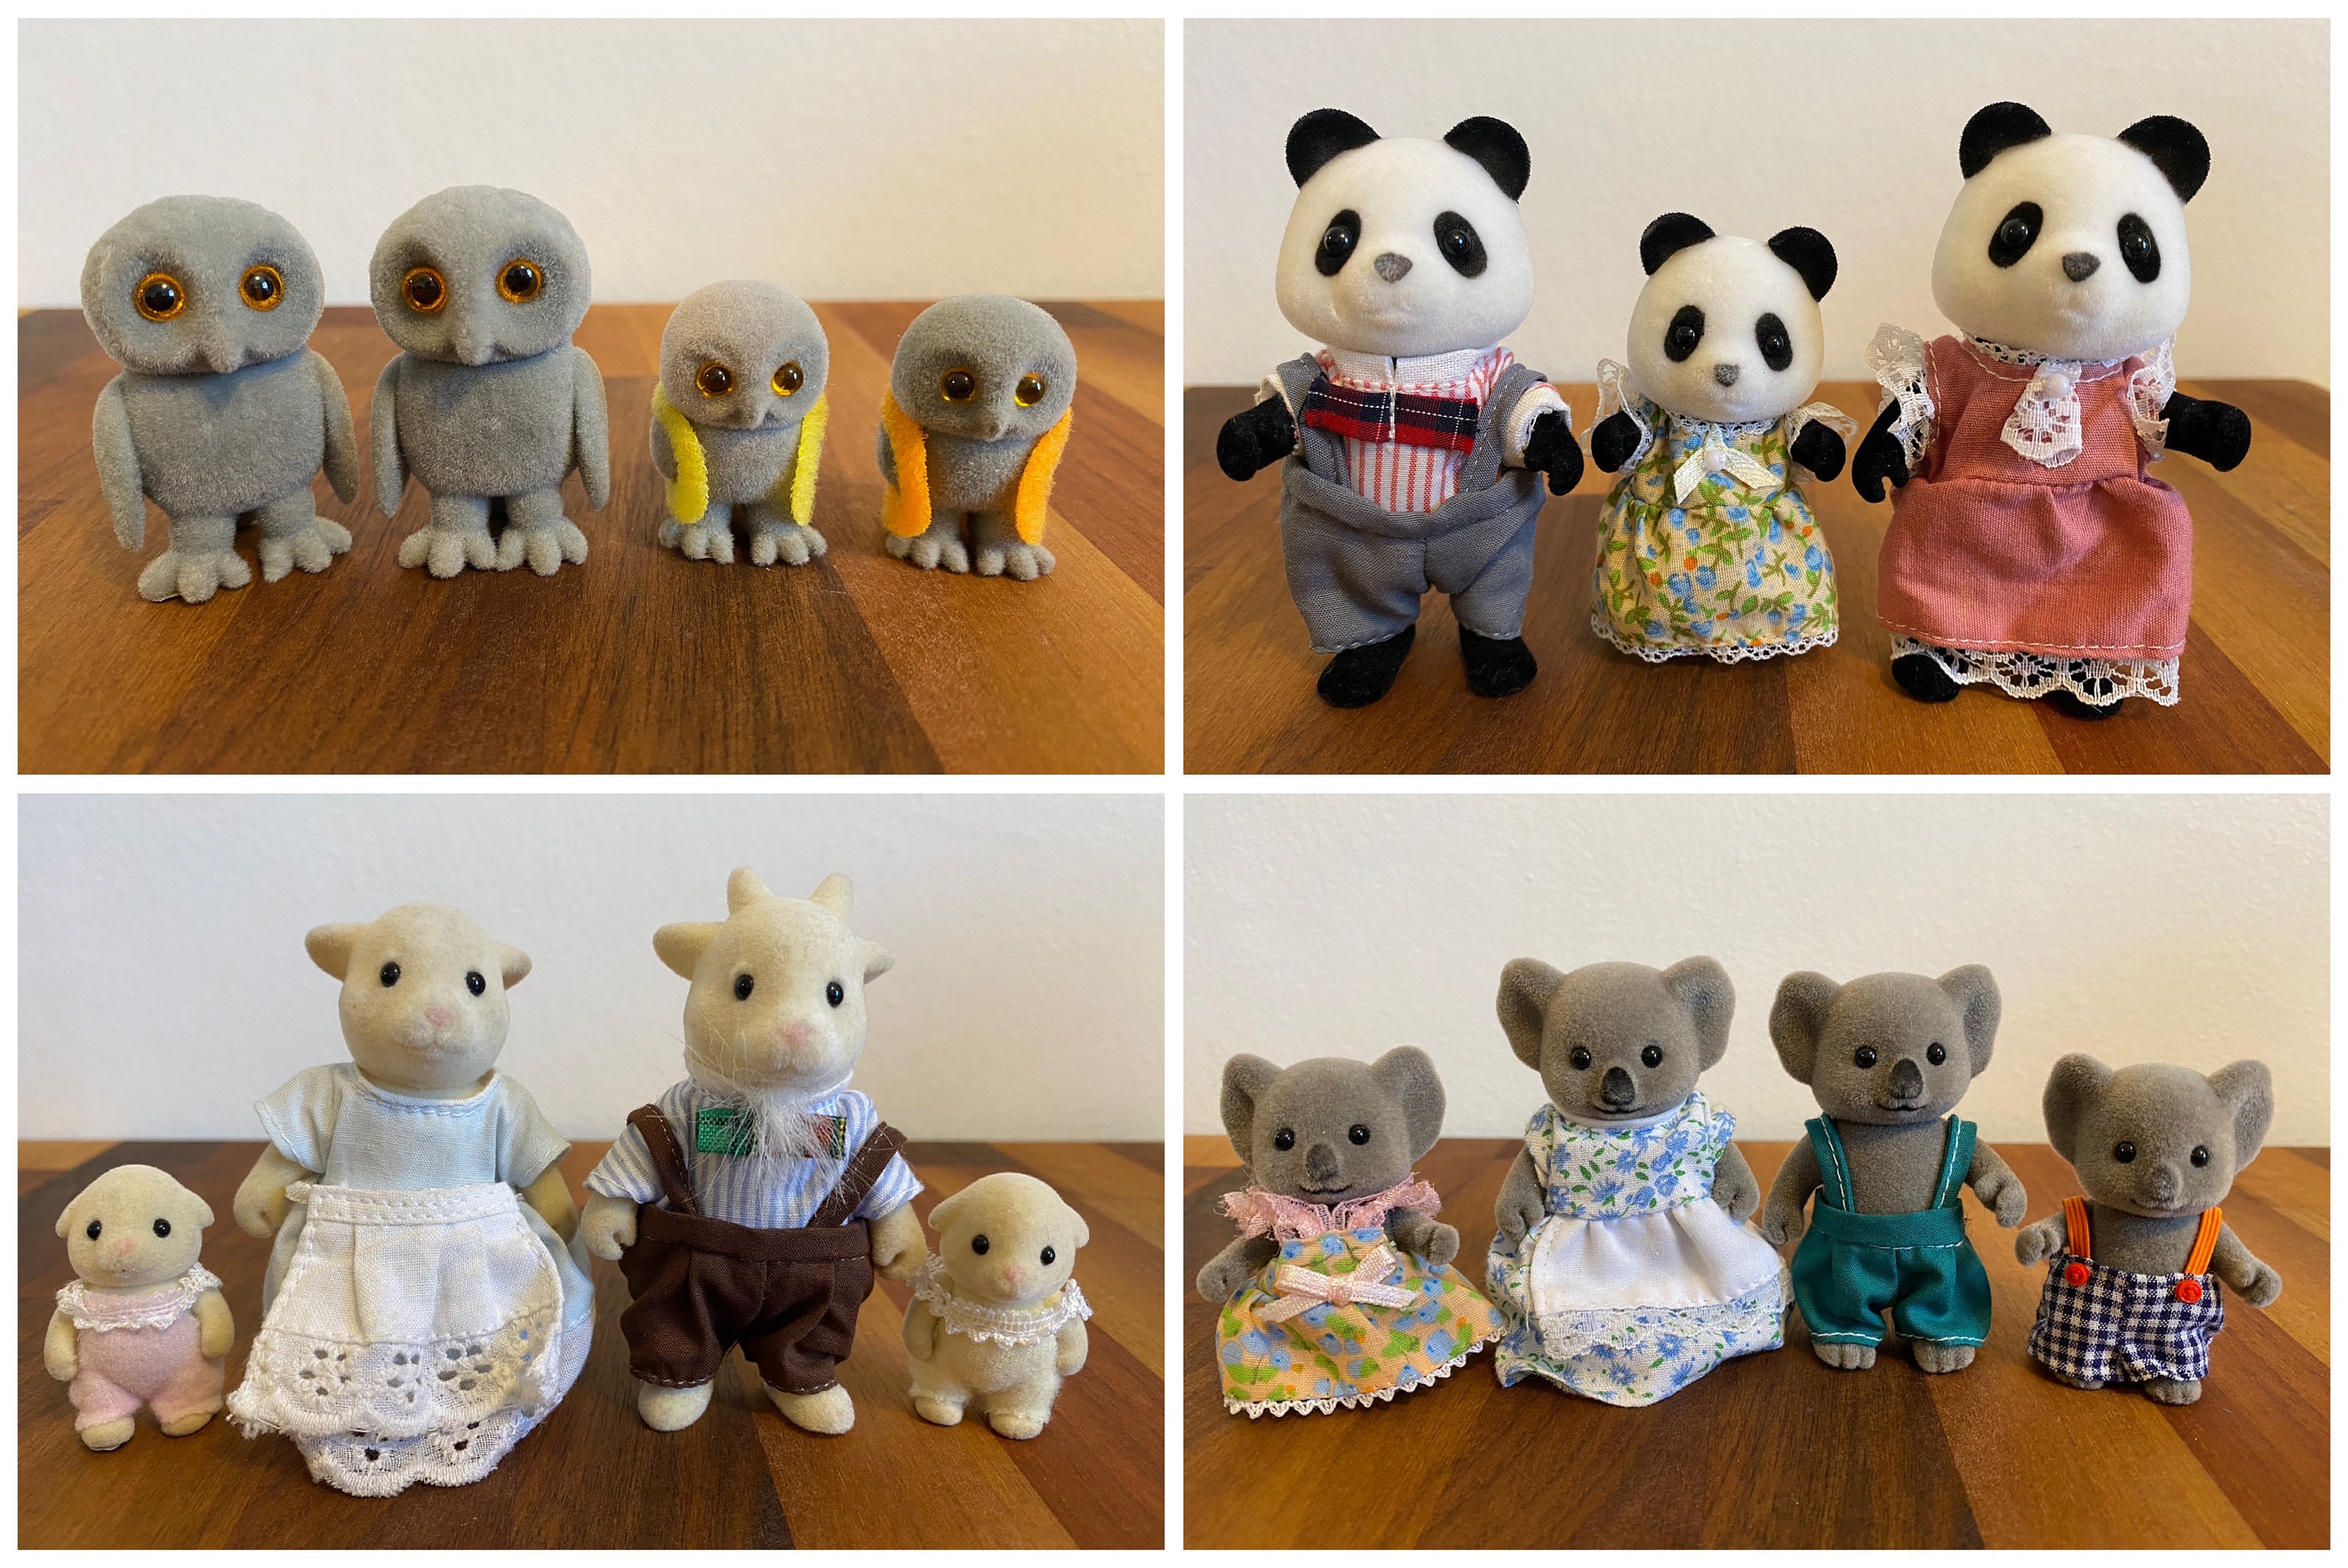 Buy Sylvanian Families Owl, Panda, Goat, Koala Family Figures Discontinued  Rare Vintage Calico Critters Online in India 